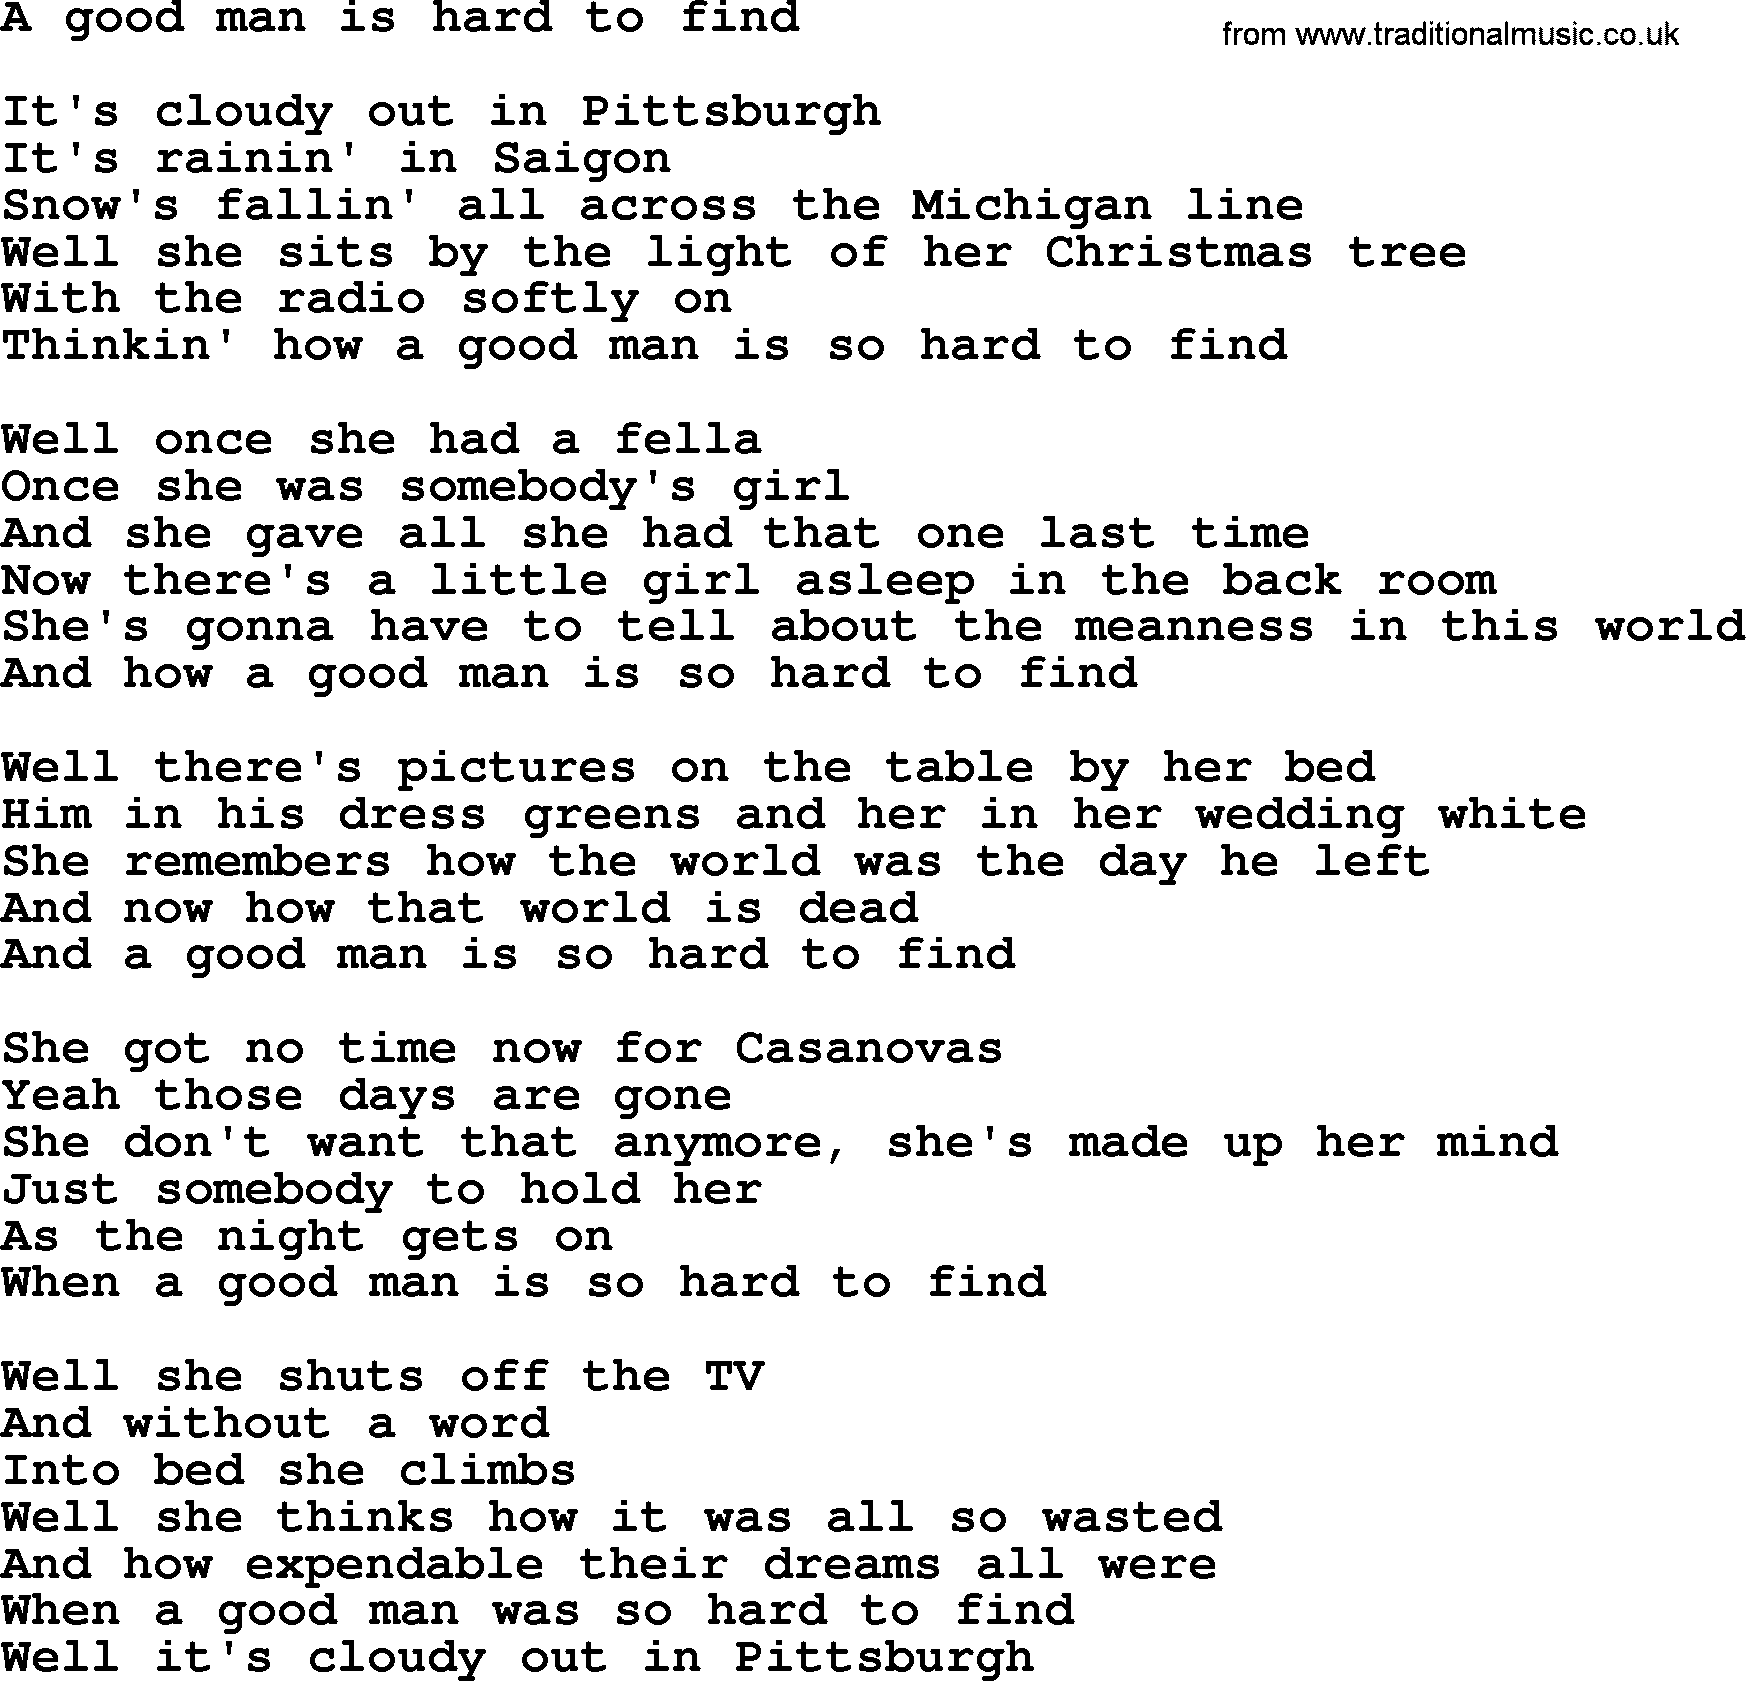 Bruce Springsteen song: A Good Man Is Hard To Find lyrics